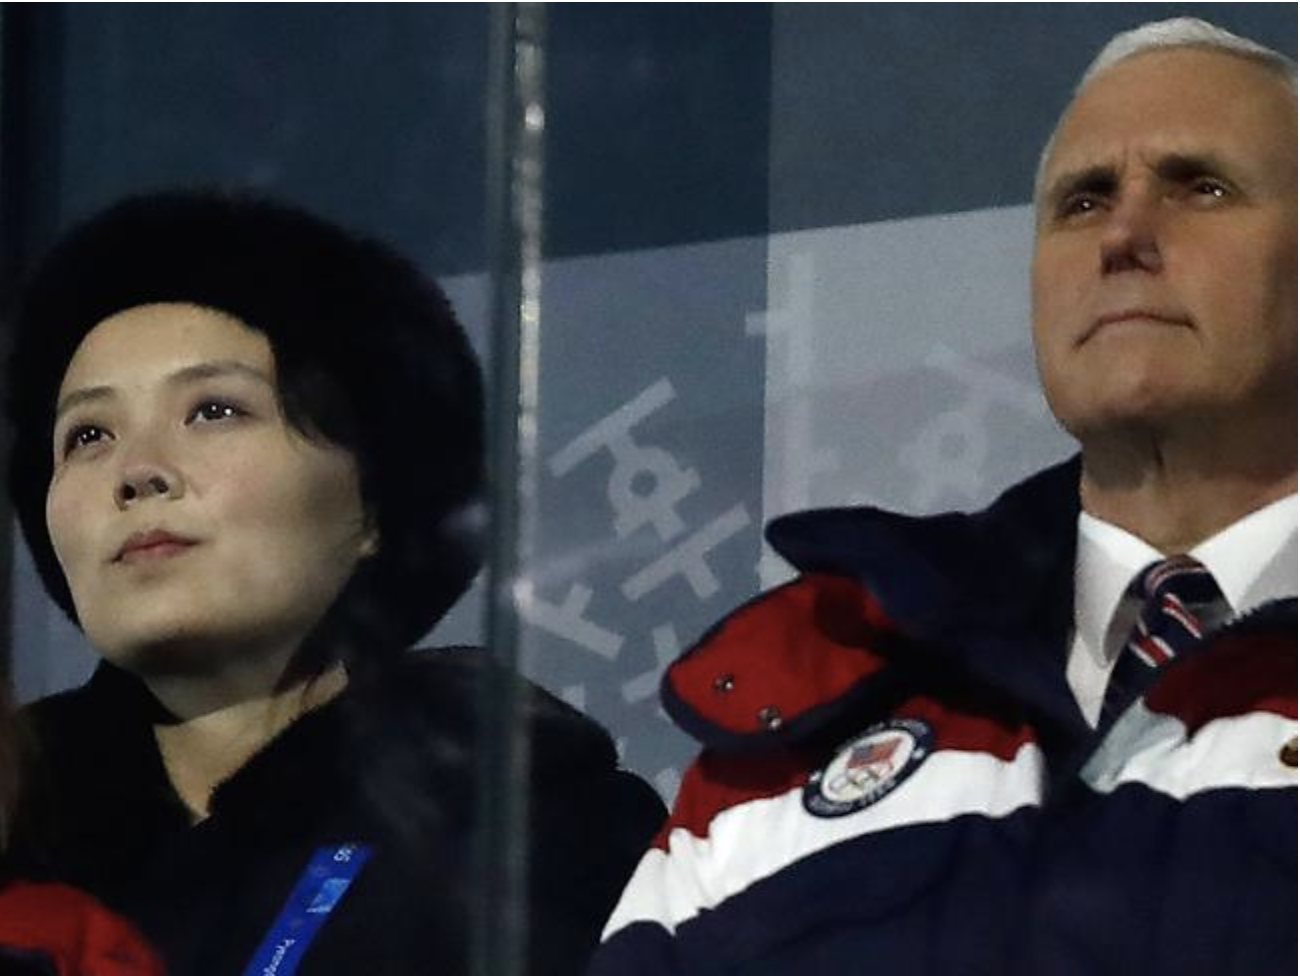  US Vice President Mike Pence (R) and North Korea's Kim Yo-jong at the opening ceremony of the Pyeongchang 2018 Winter Olympic Games. Picture: Odd Anderson/AFPSource:AFP